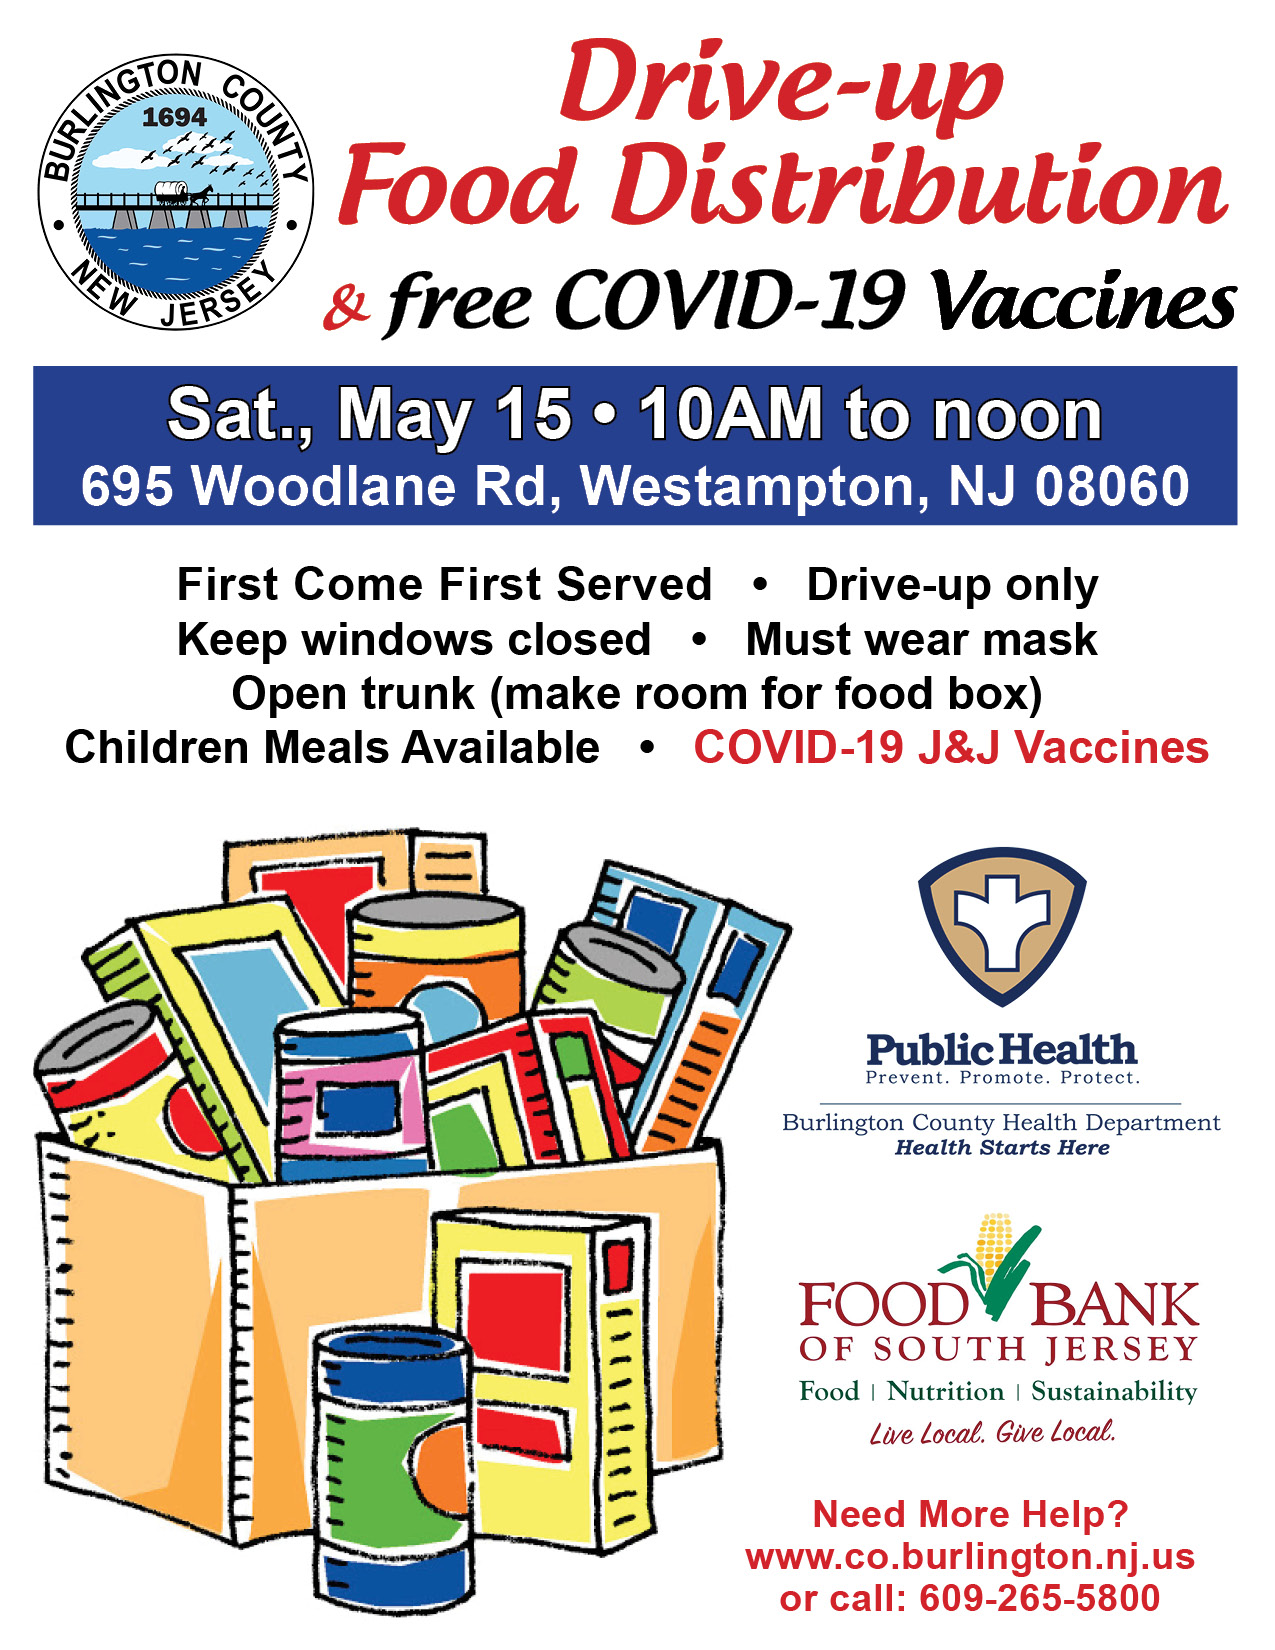 Burlington County On Twitter Please Spread The Word There Is A Food Distribution Event And Free Covid-19 Vaccine Clinic This Saturday May 15 From 10am-12pm Please Enter Through The Bcit Campus Located